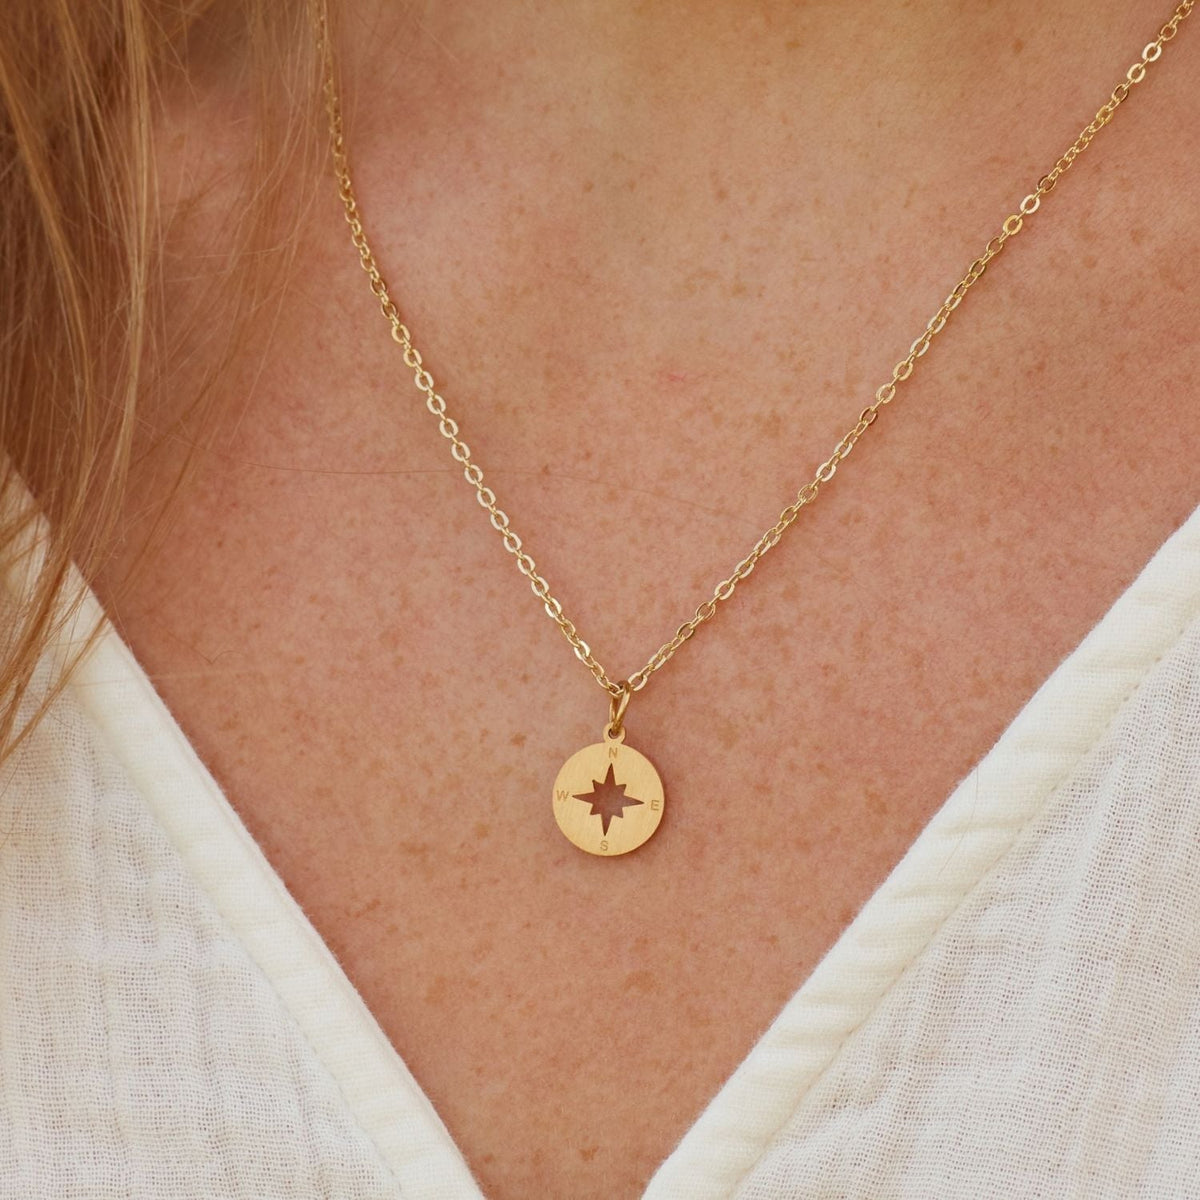 Mother of The Groom (From Bride) | Man of My Dreams | Compass Necklace